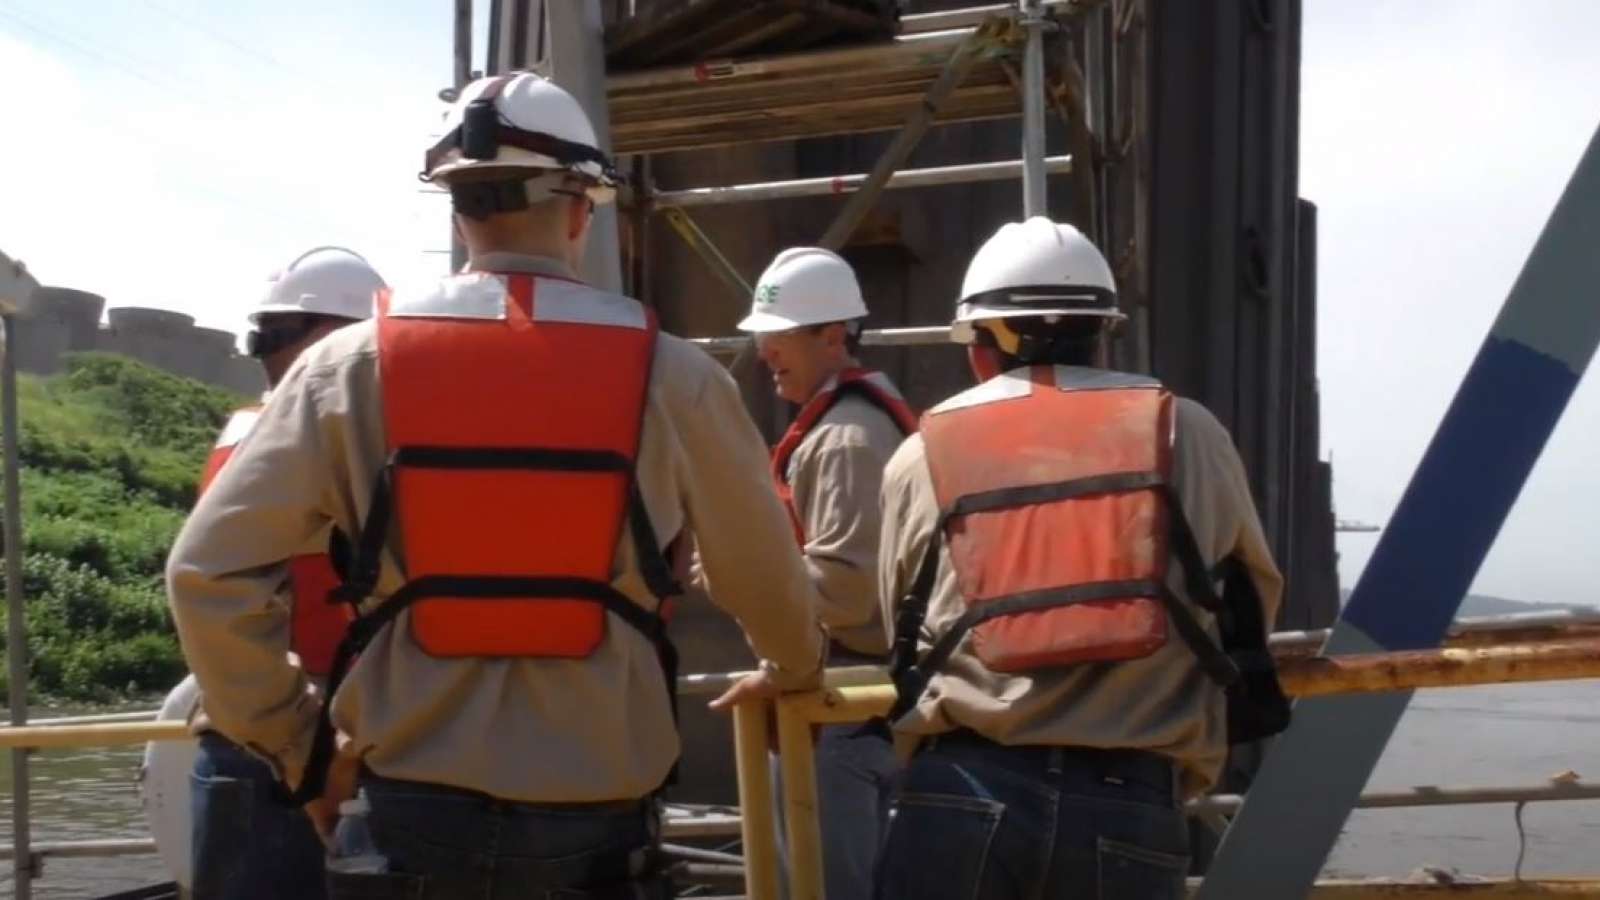 Co-op students wearing safety equipment at a power plant